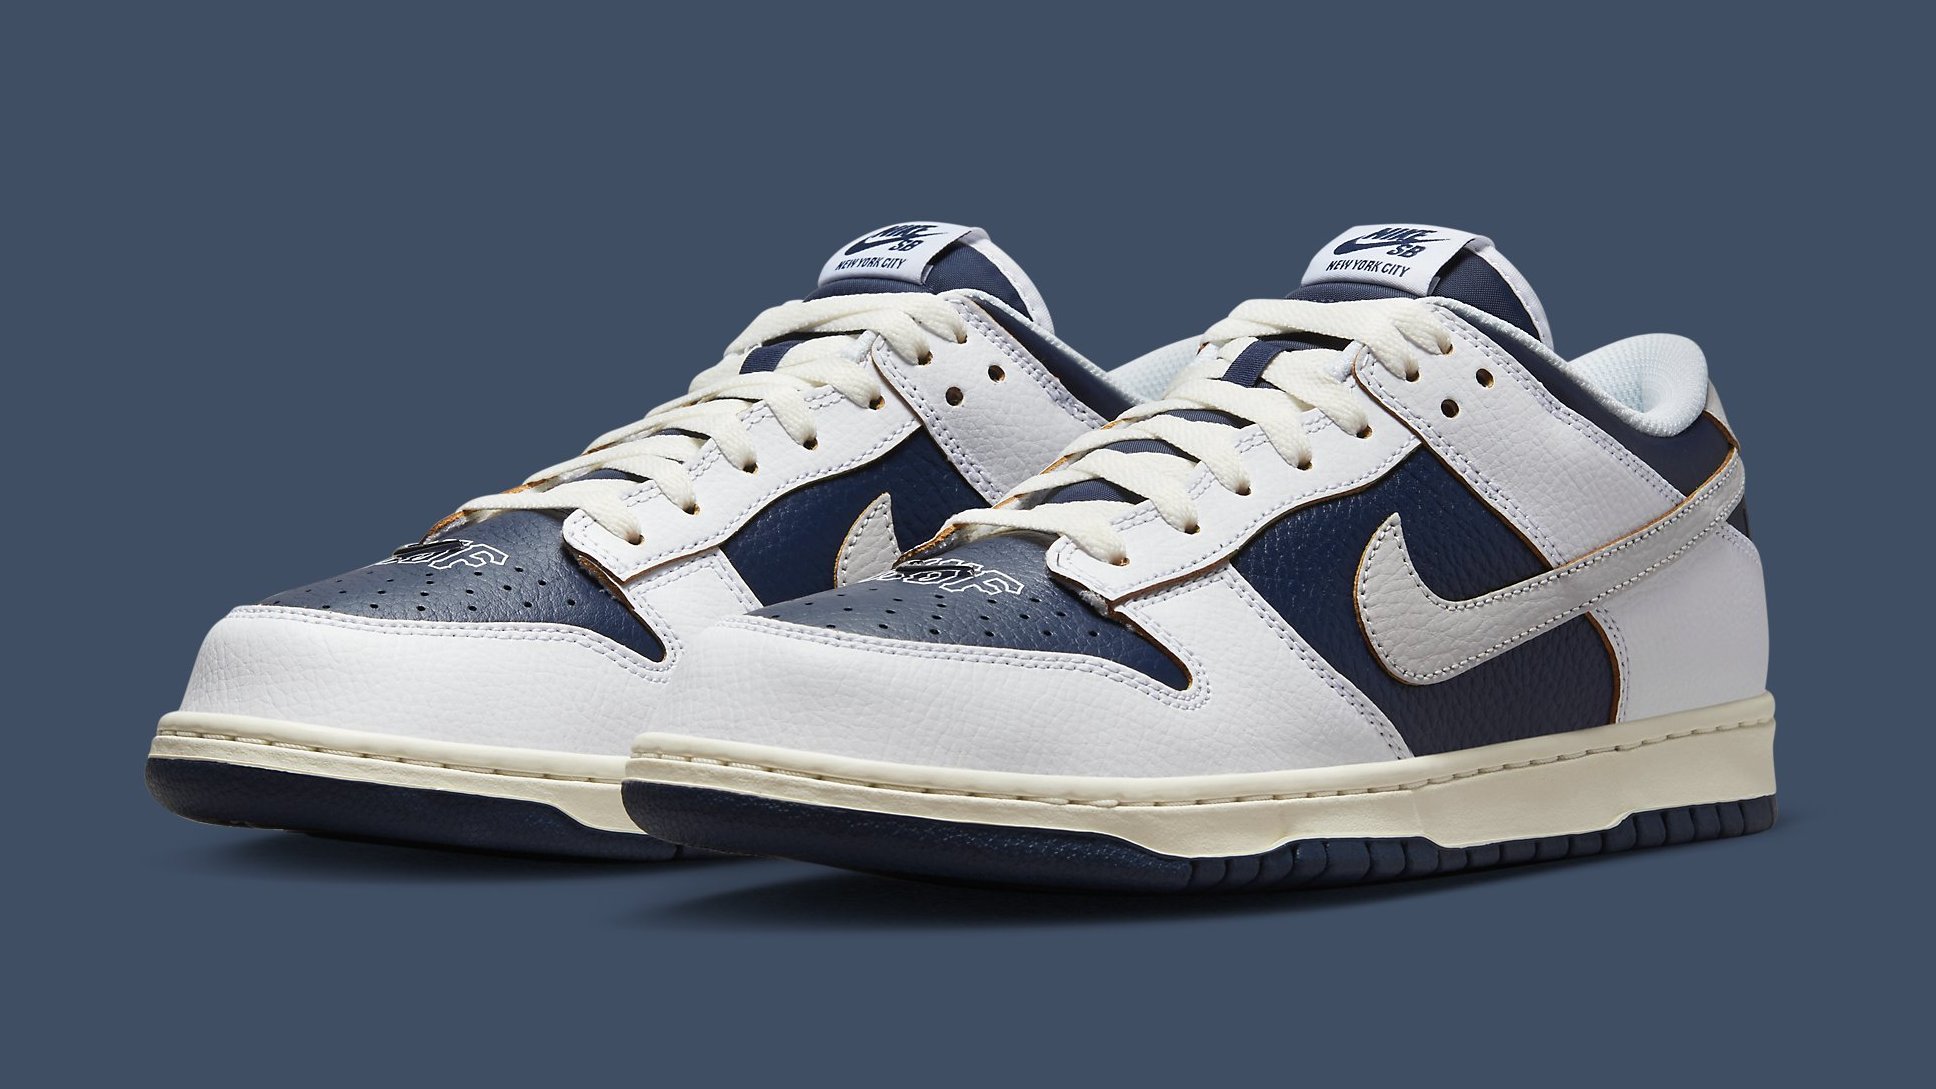 Best Look Yet at the HUF x Nike SB Dunk Lows